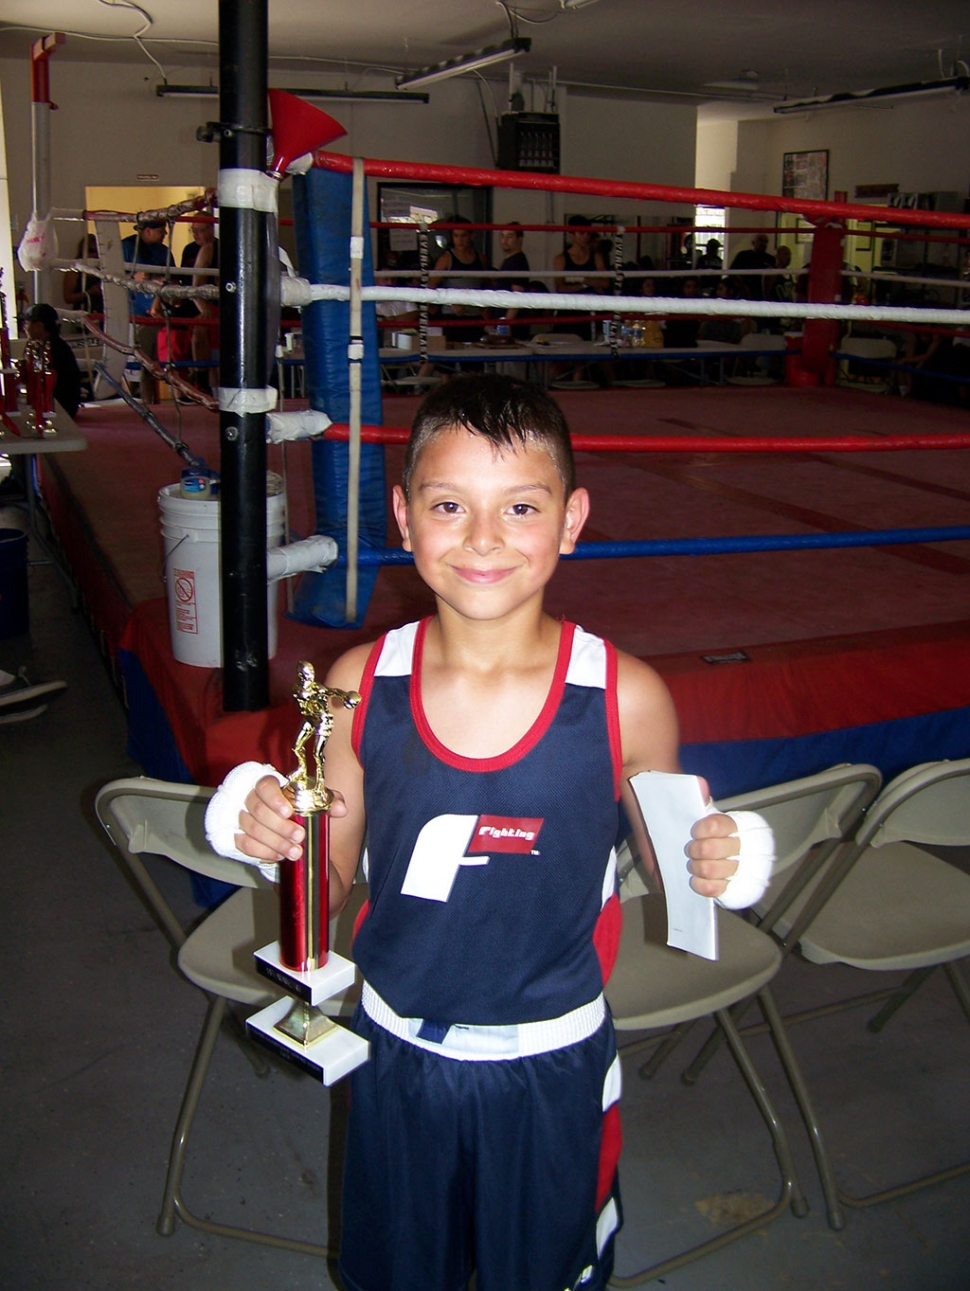 The Fillmore Boxing Club's Diego Amezcua competed this weekend at the Young Champions Boxing Show in San Fernando, CA in the 65 lb. weight class. He was victorious in his match winning via decision vs. Robert Camberos of Tarzana's Outlaws Boxing Club. The bout was three rounds of one minute duration. Amezcua's next contest is scheduled for October 13th in Valencia.